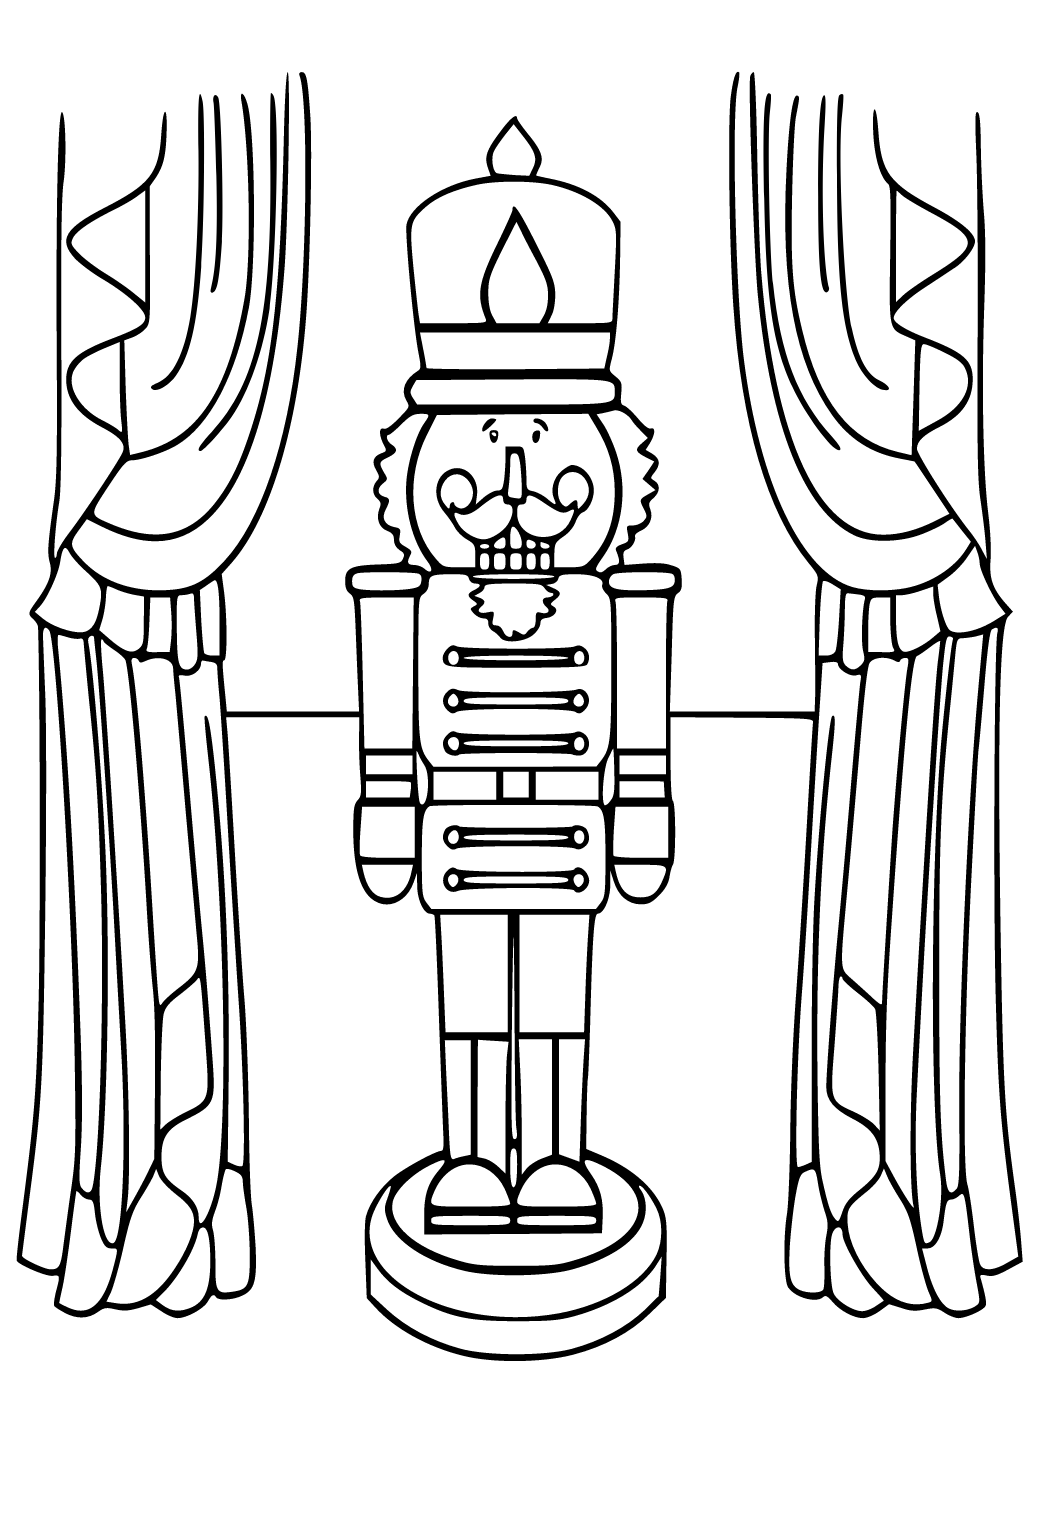 Free printable nutcracker scene coloring page for adults and kids